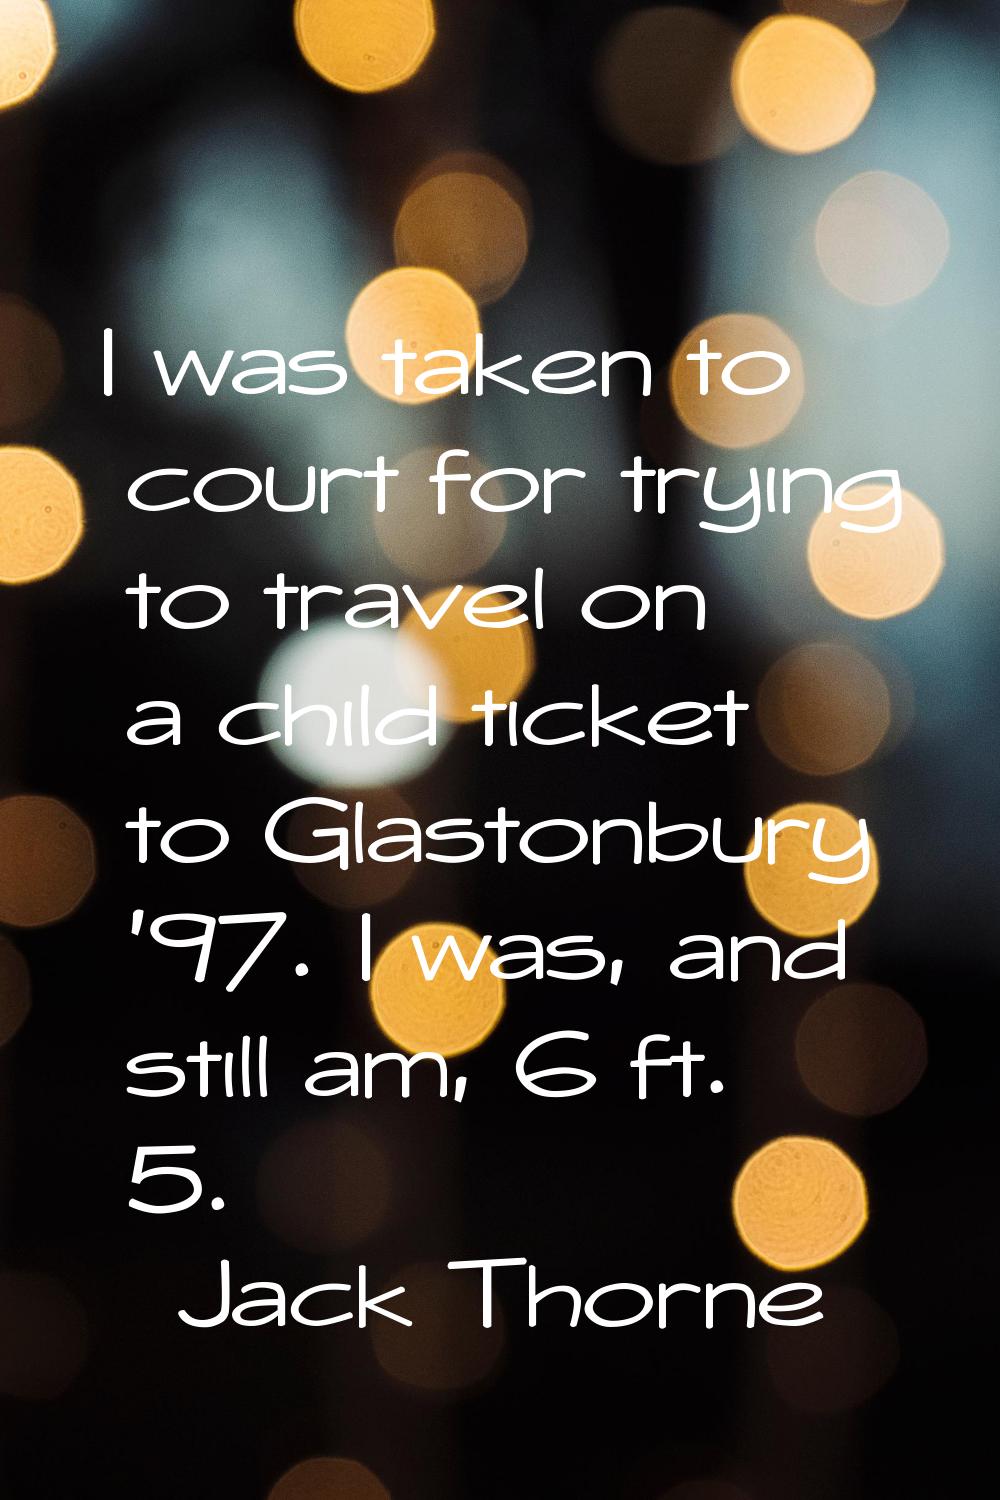 I was taken to court for trying to travel on a child ticket to Glastonbury '97. I was, and still am